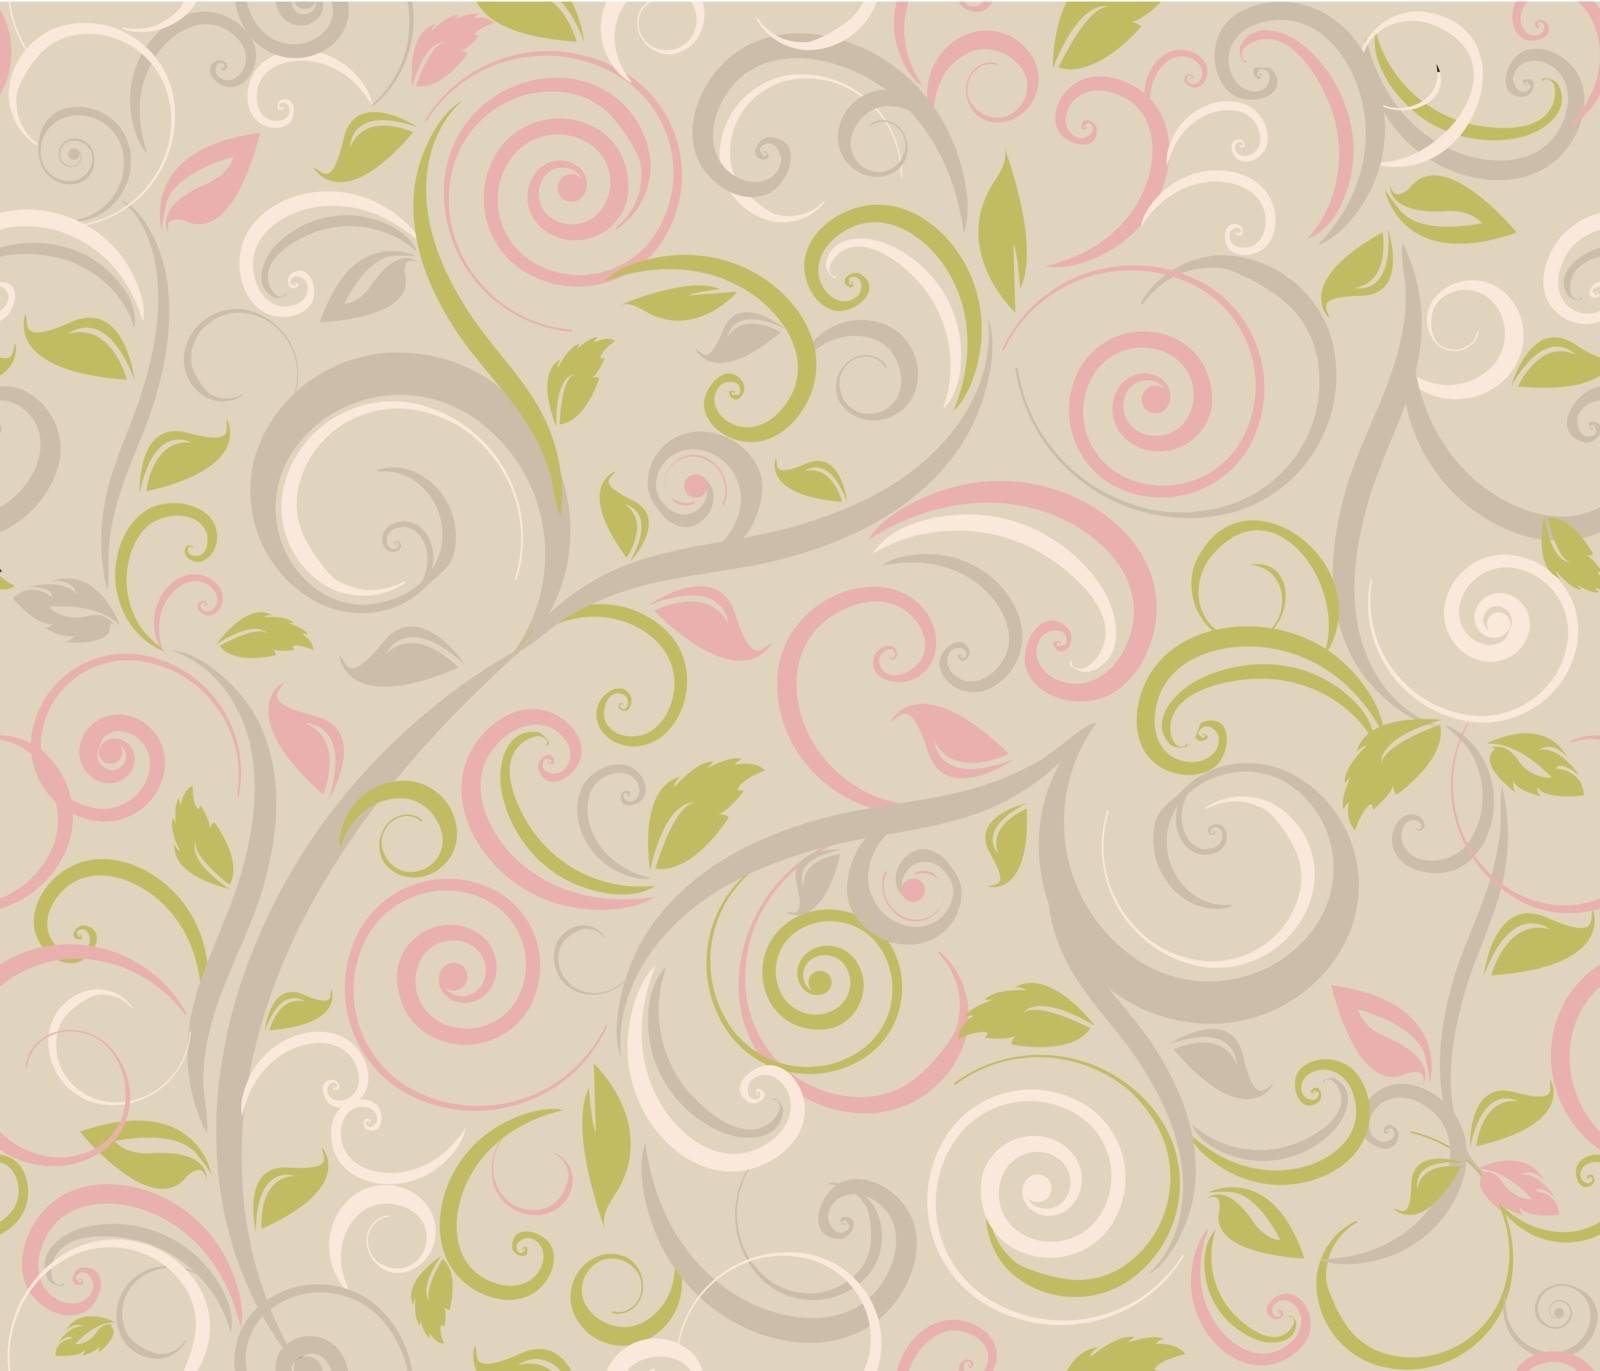 Floral abstract background, seamless. Vector illustration